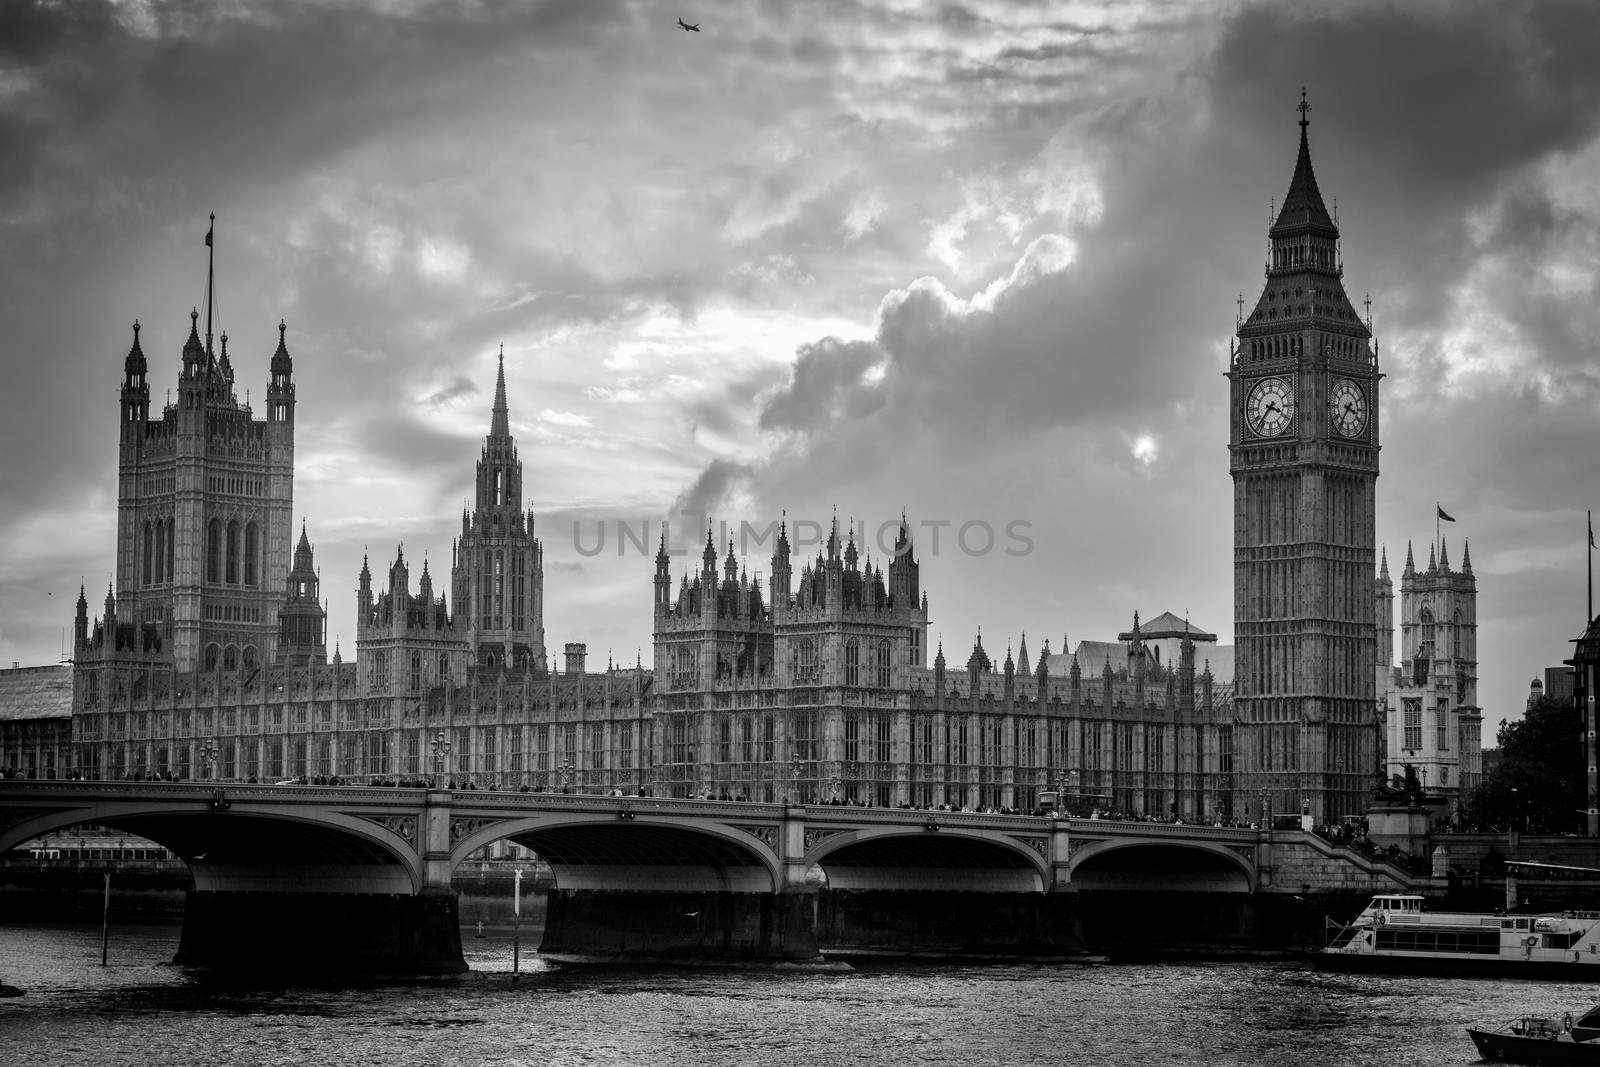 Houses of Parliament and Big Ben in London, UK